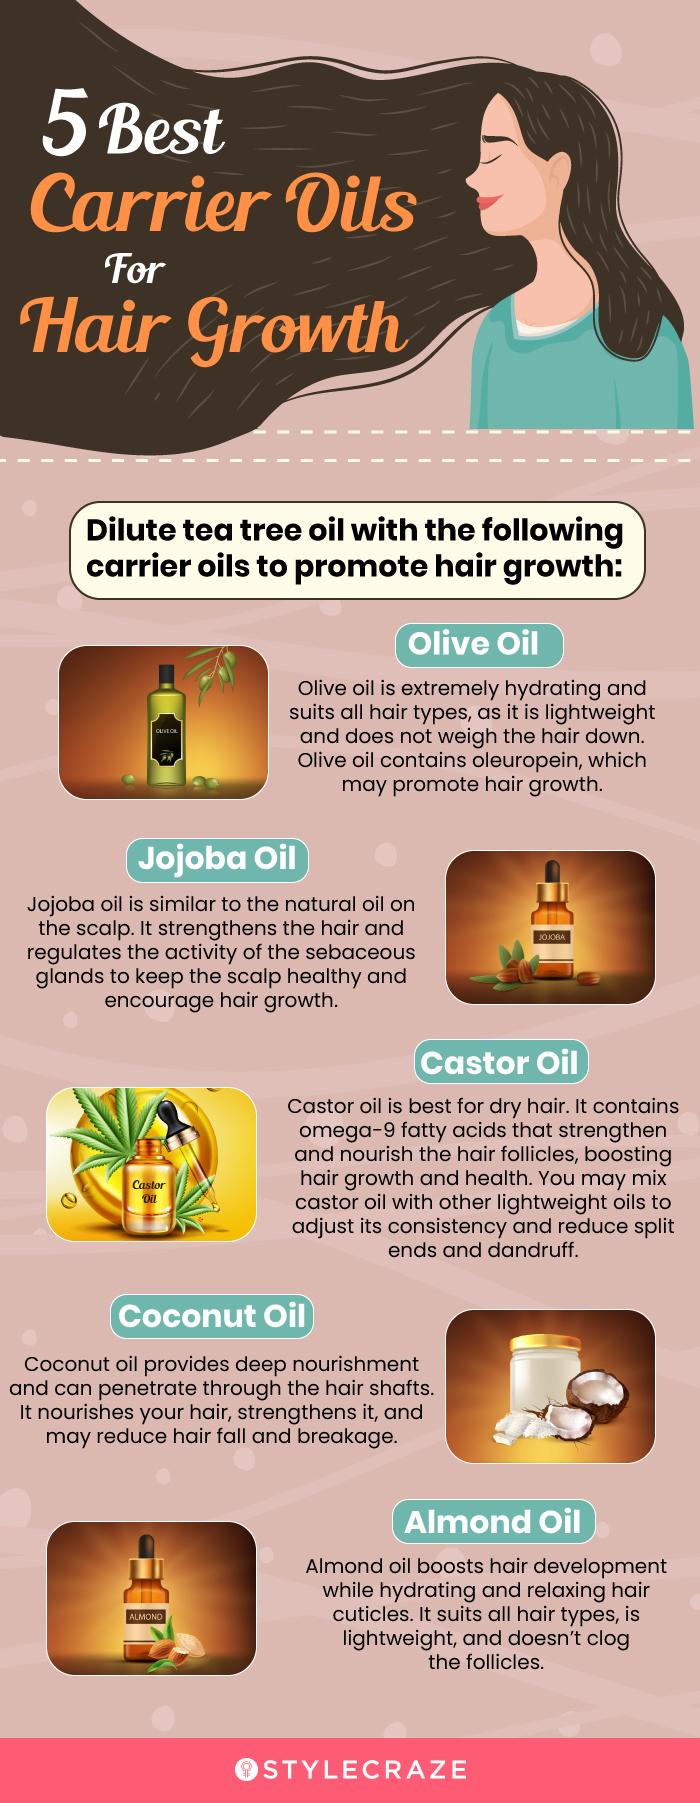 5 best carrier oils for hair growth (infographic)